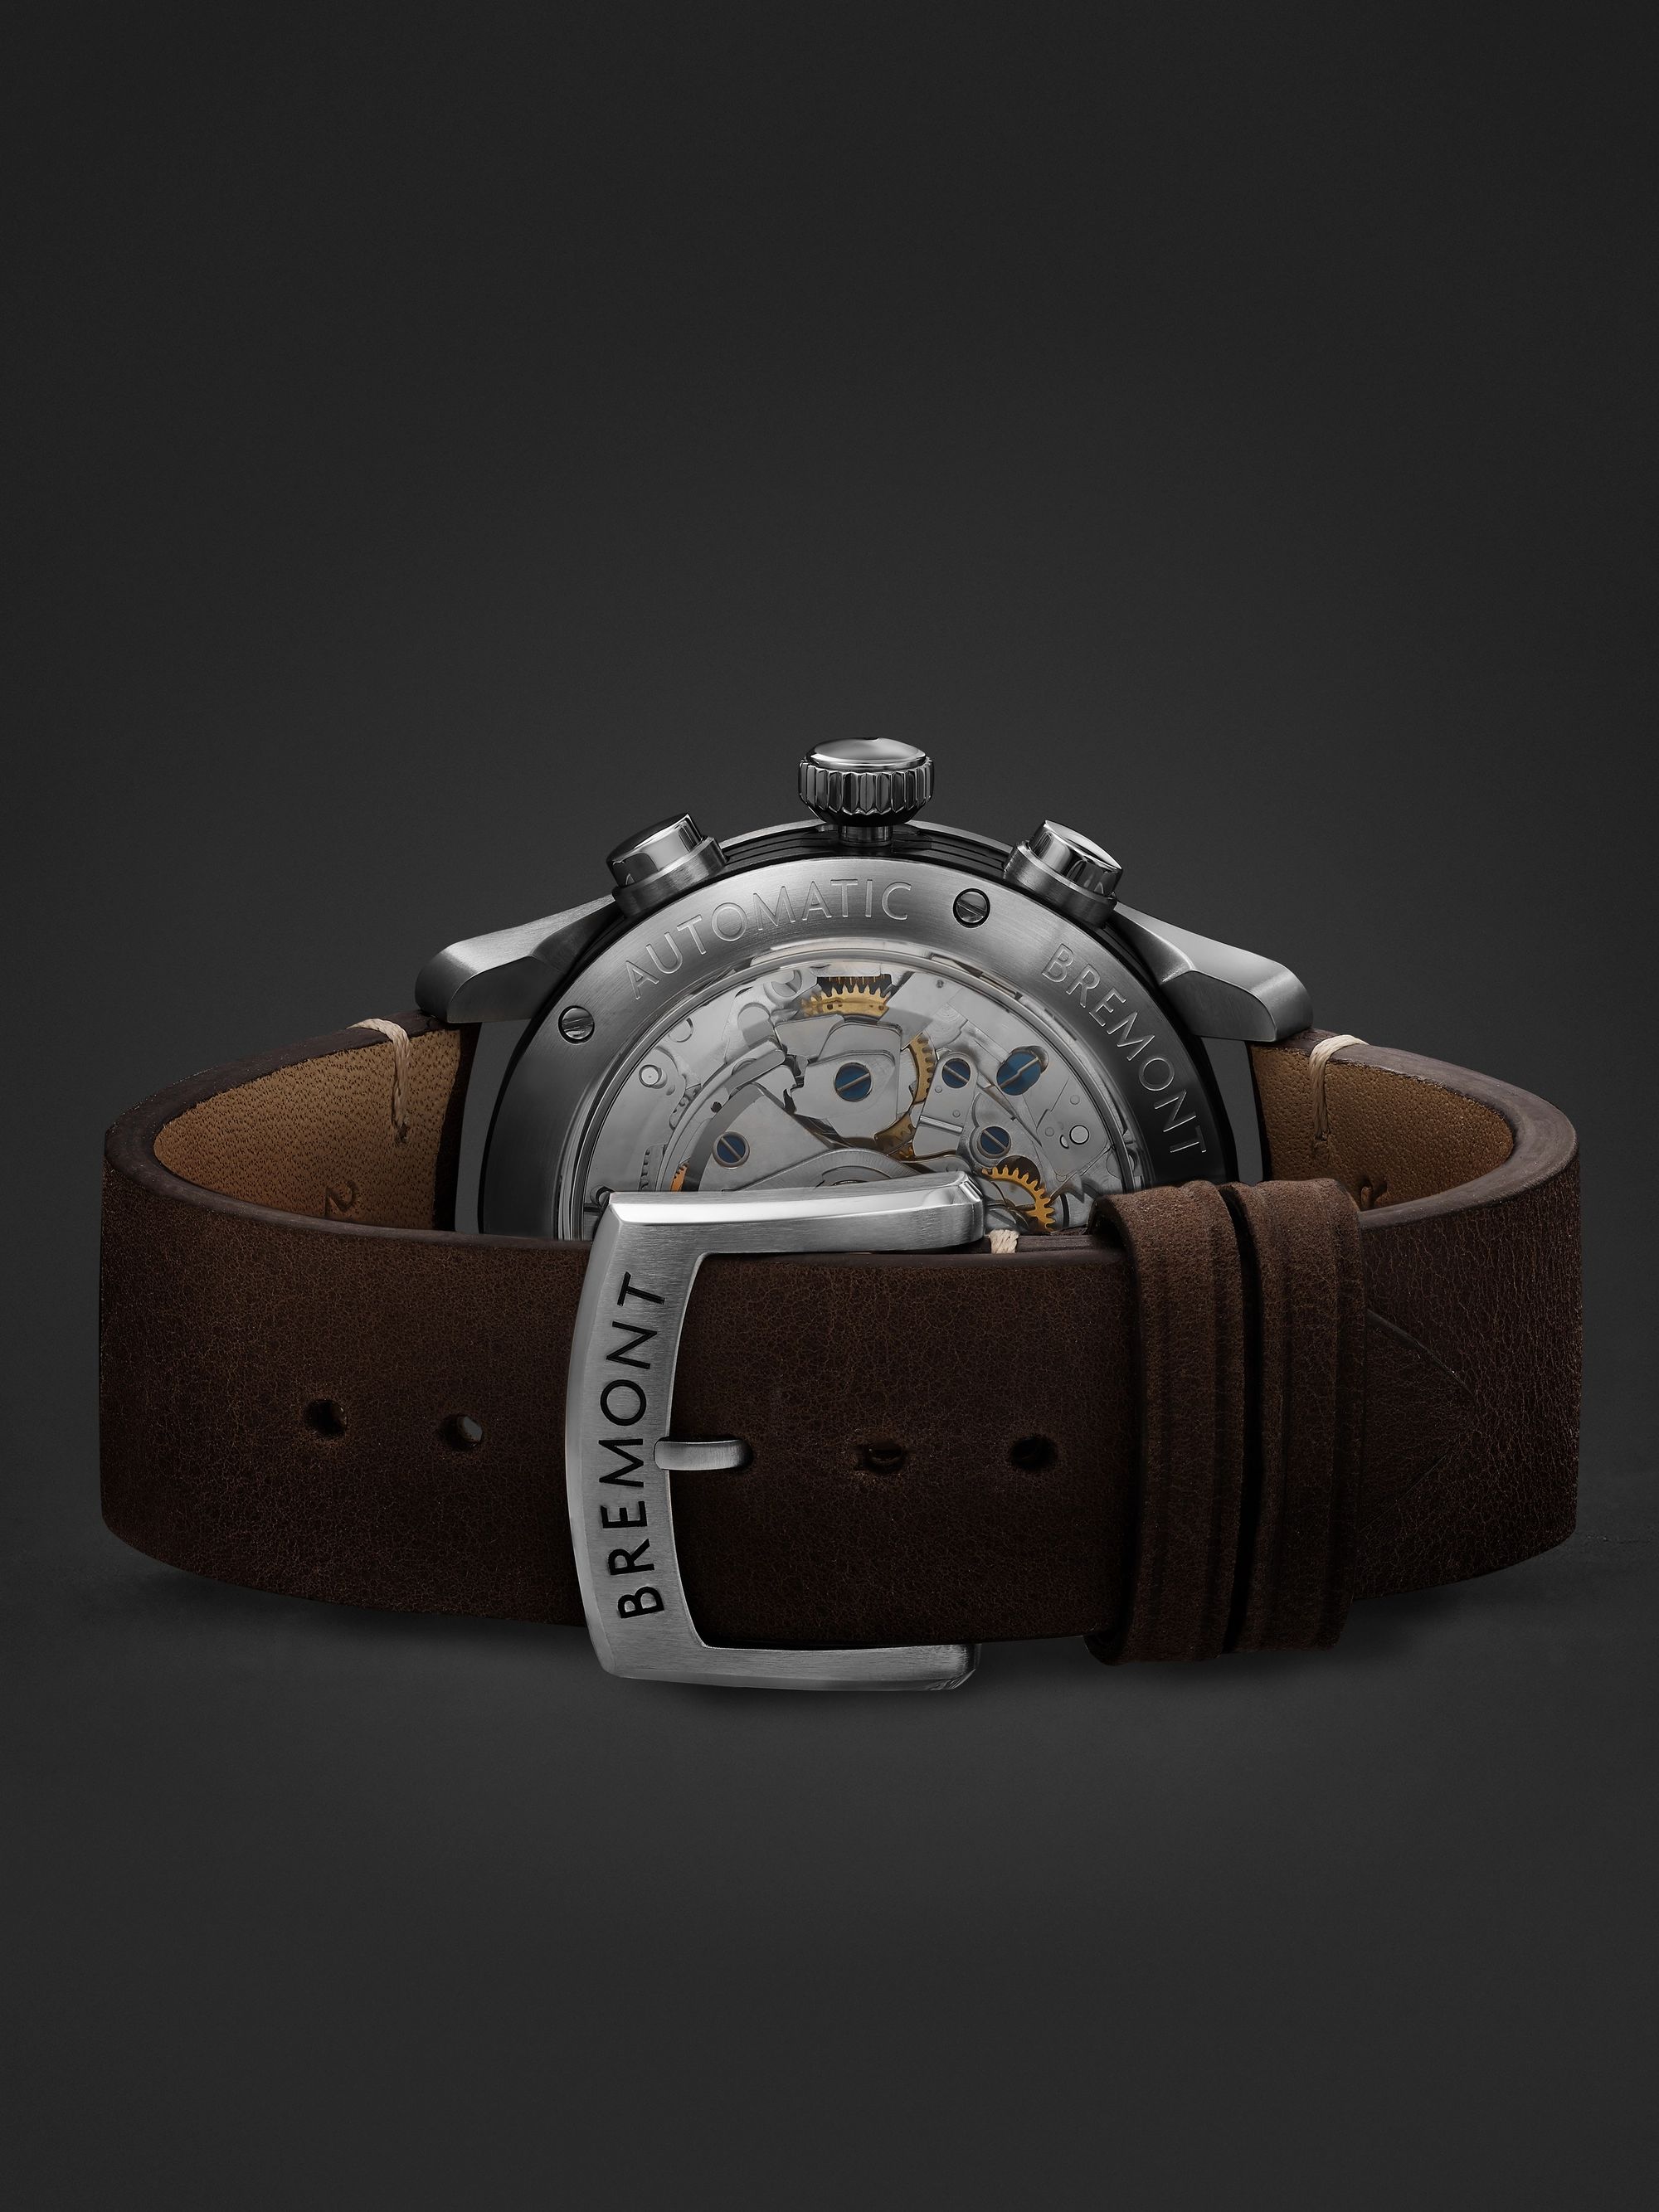 BREMONT ALT1-C Griffon Automatic Chronograph 43mm Stainless Steel and Leather Watch, Ref. No. ALT1-C-GRIFFON-R-S